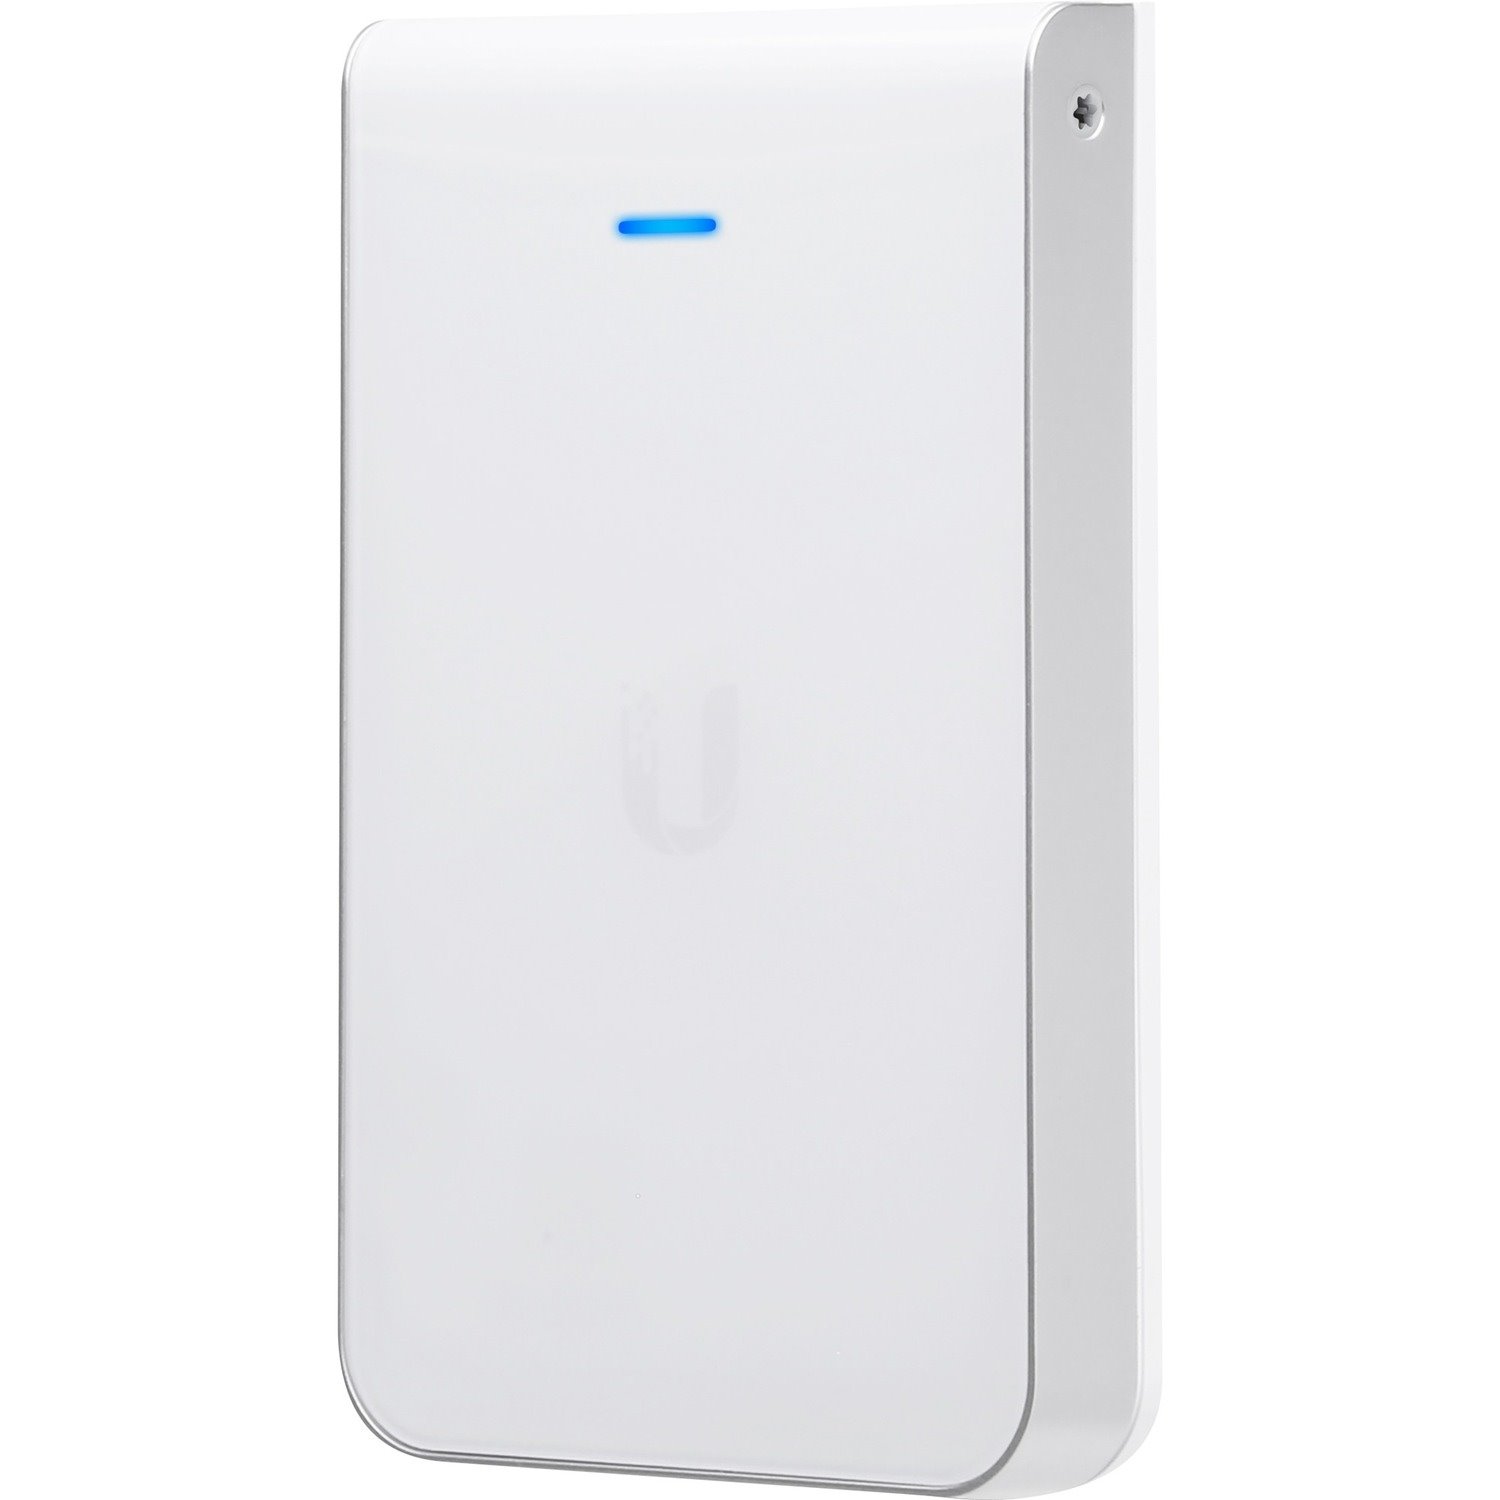 Ubiquiti Networks UniFi in-Wall Wi-Fi Access Point 802.11Ac Wave 2 (Uap-Iw-Hd-Us)